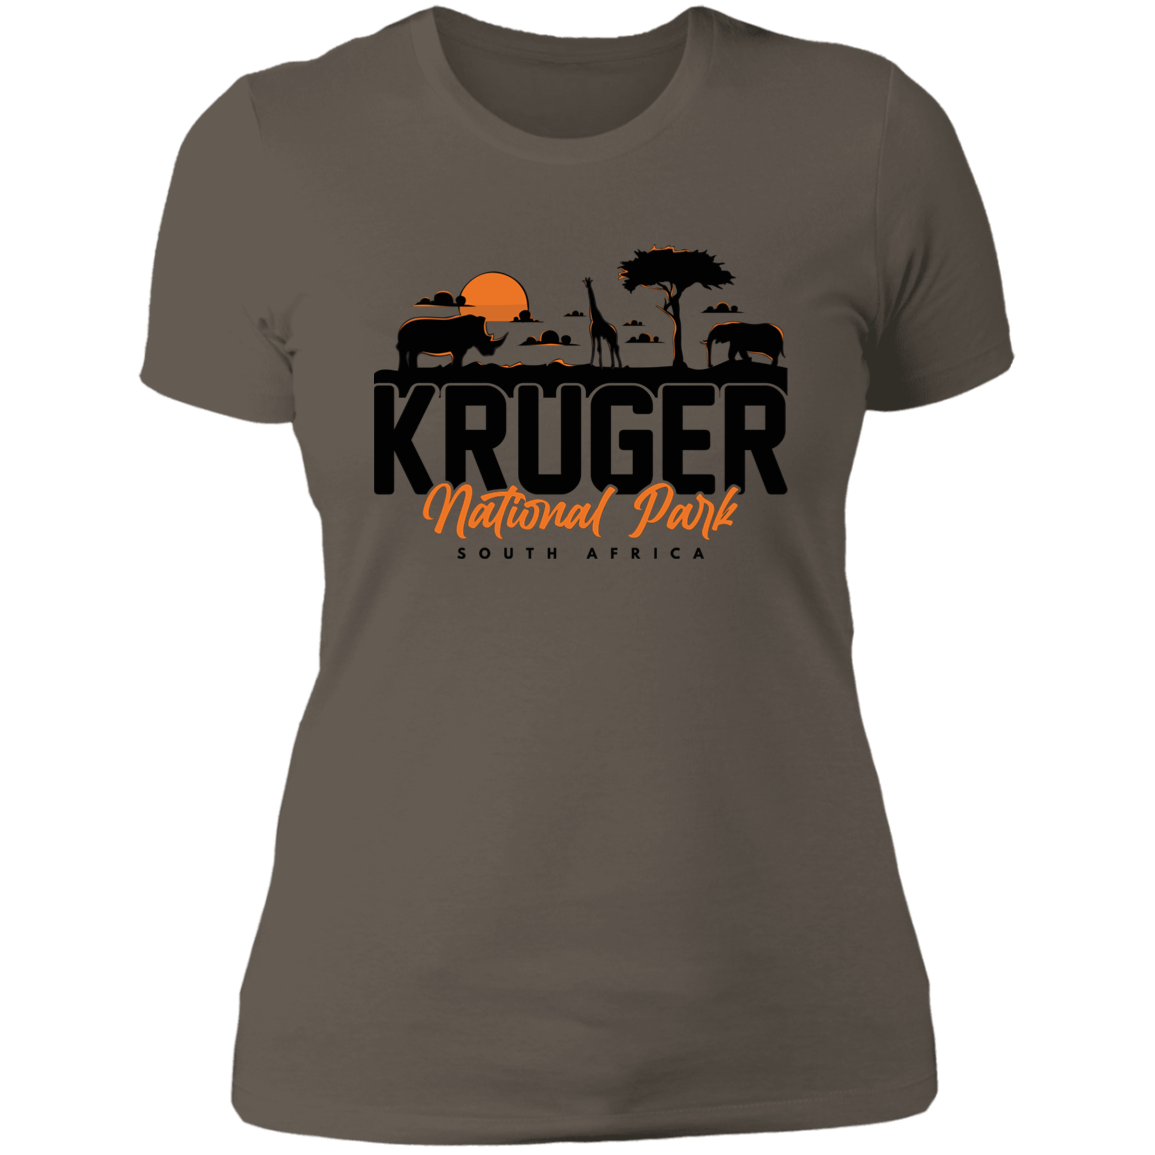 Kruger National Park South Africa Women's Classic T-Shirt